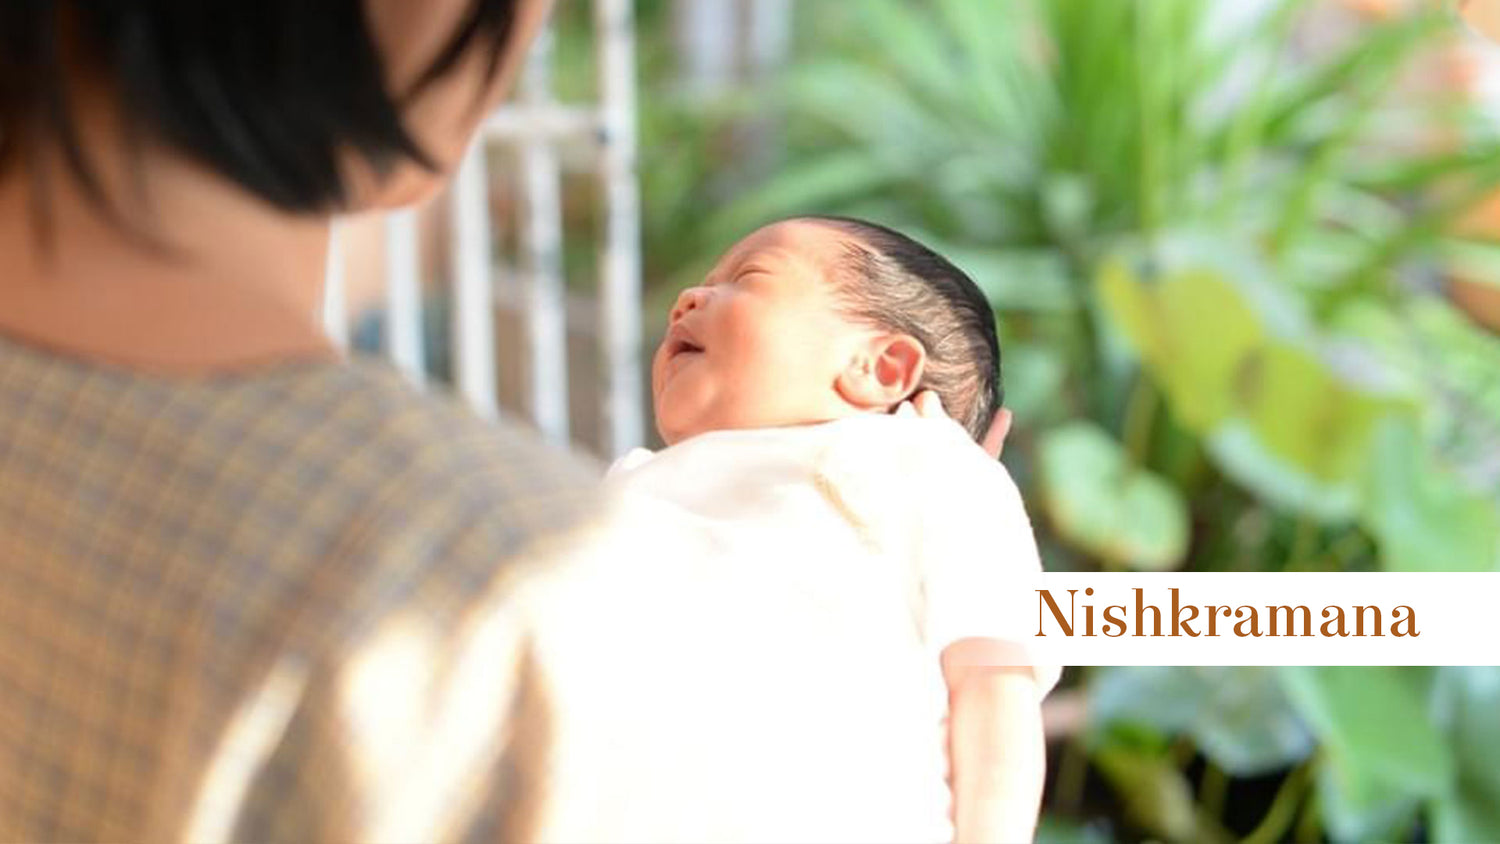 Nishkraman: The Right Time To Take Your Newborn Out.